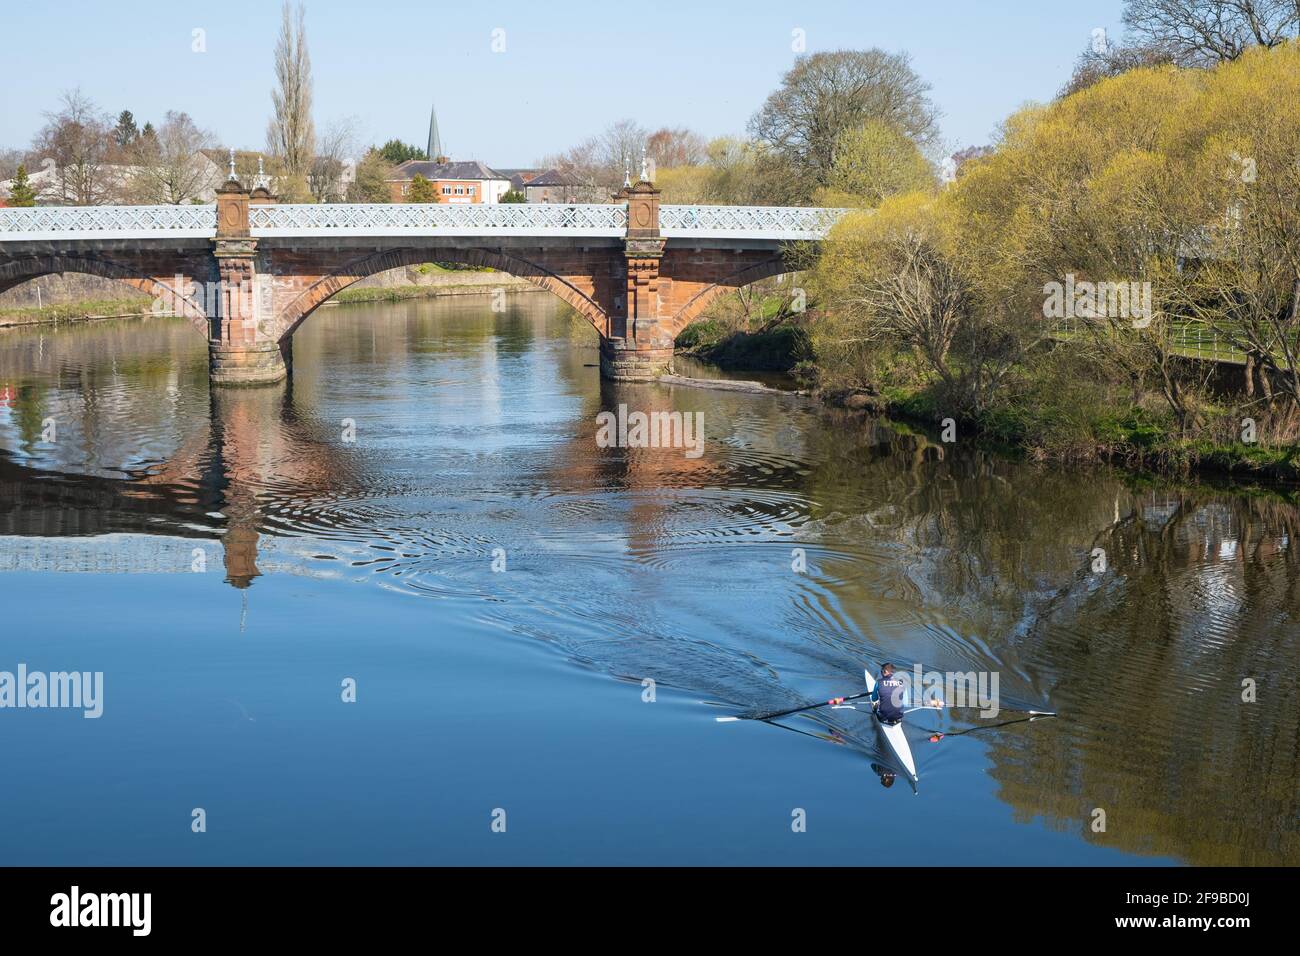 17th April in Dumfries, Scotland, members of the local rowing club take to the water as lockdown restrictions begin to ease. Stock Photo